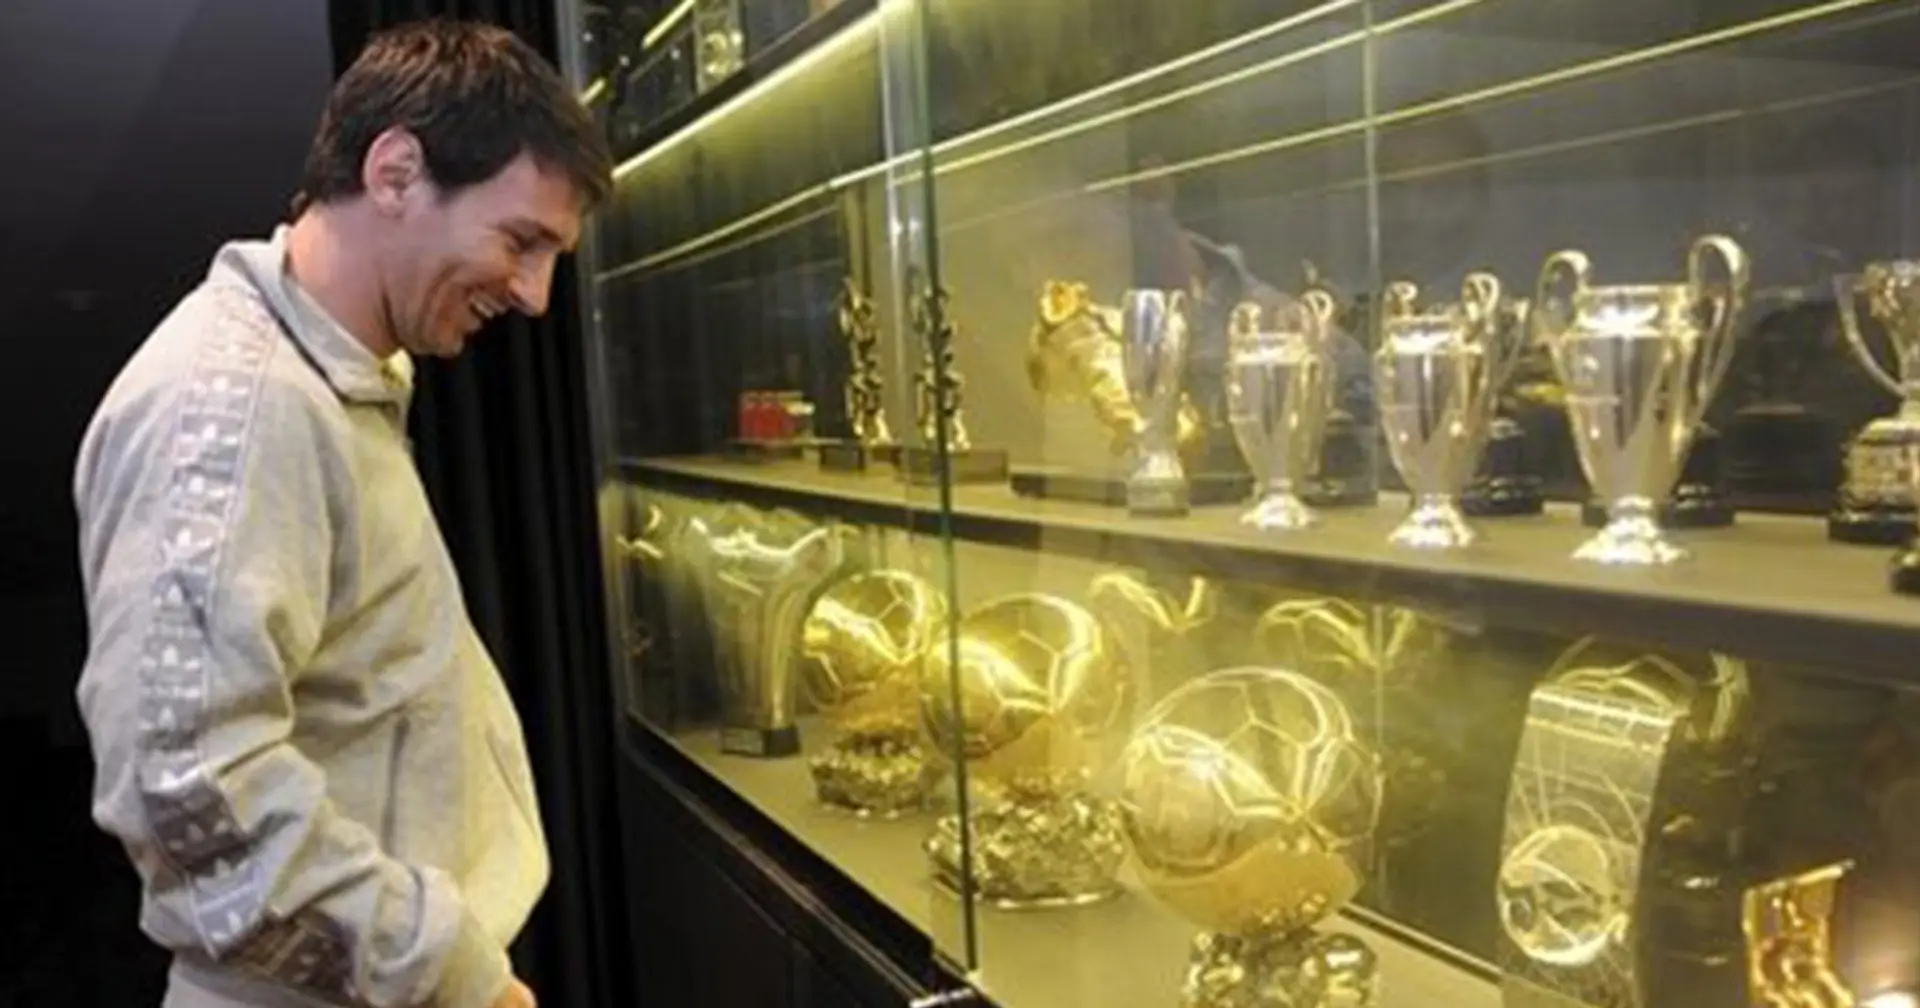 One individual award Messi reportedly left in locker room upon leaving Barca